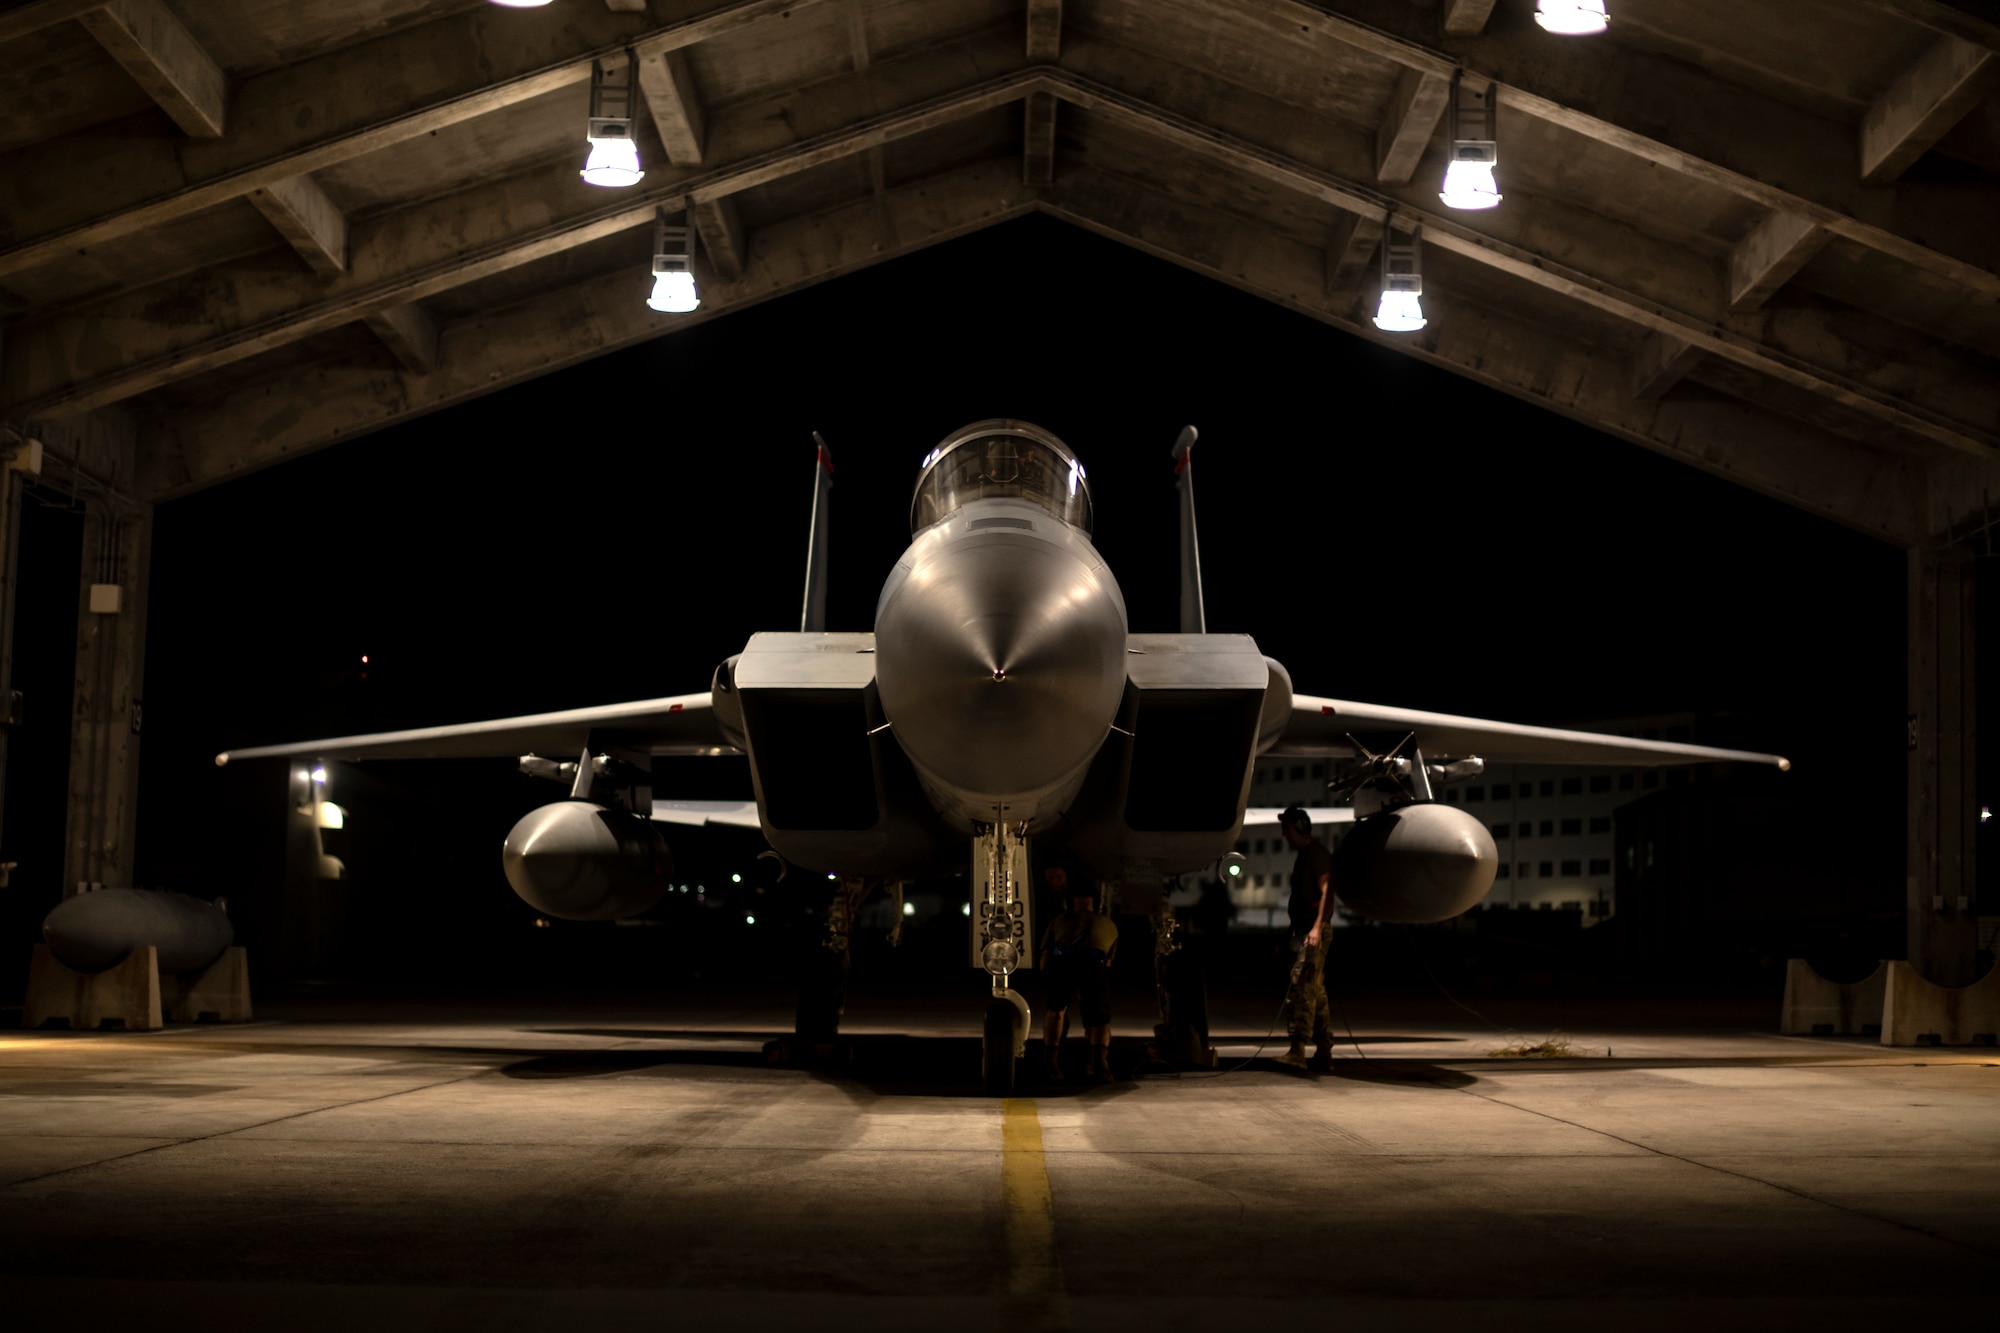 A U.S. Air Force F-15C Eagle assigned to the 44th Fighter Squadron sits on the flightline after returning from a training sortie in support of Exercise Southern Beach at Kadena Air Base, Japan, Oct. 28, 2021. Southern Beach is a continual effort to enhance interoperability between U.S. Forces and host nation partners. (U.S. Air Force photo by Senior Airman Jessi Monte)